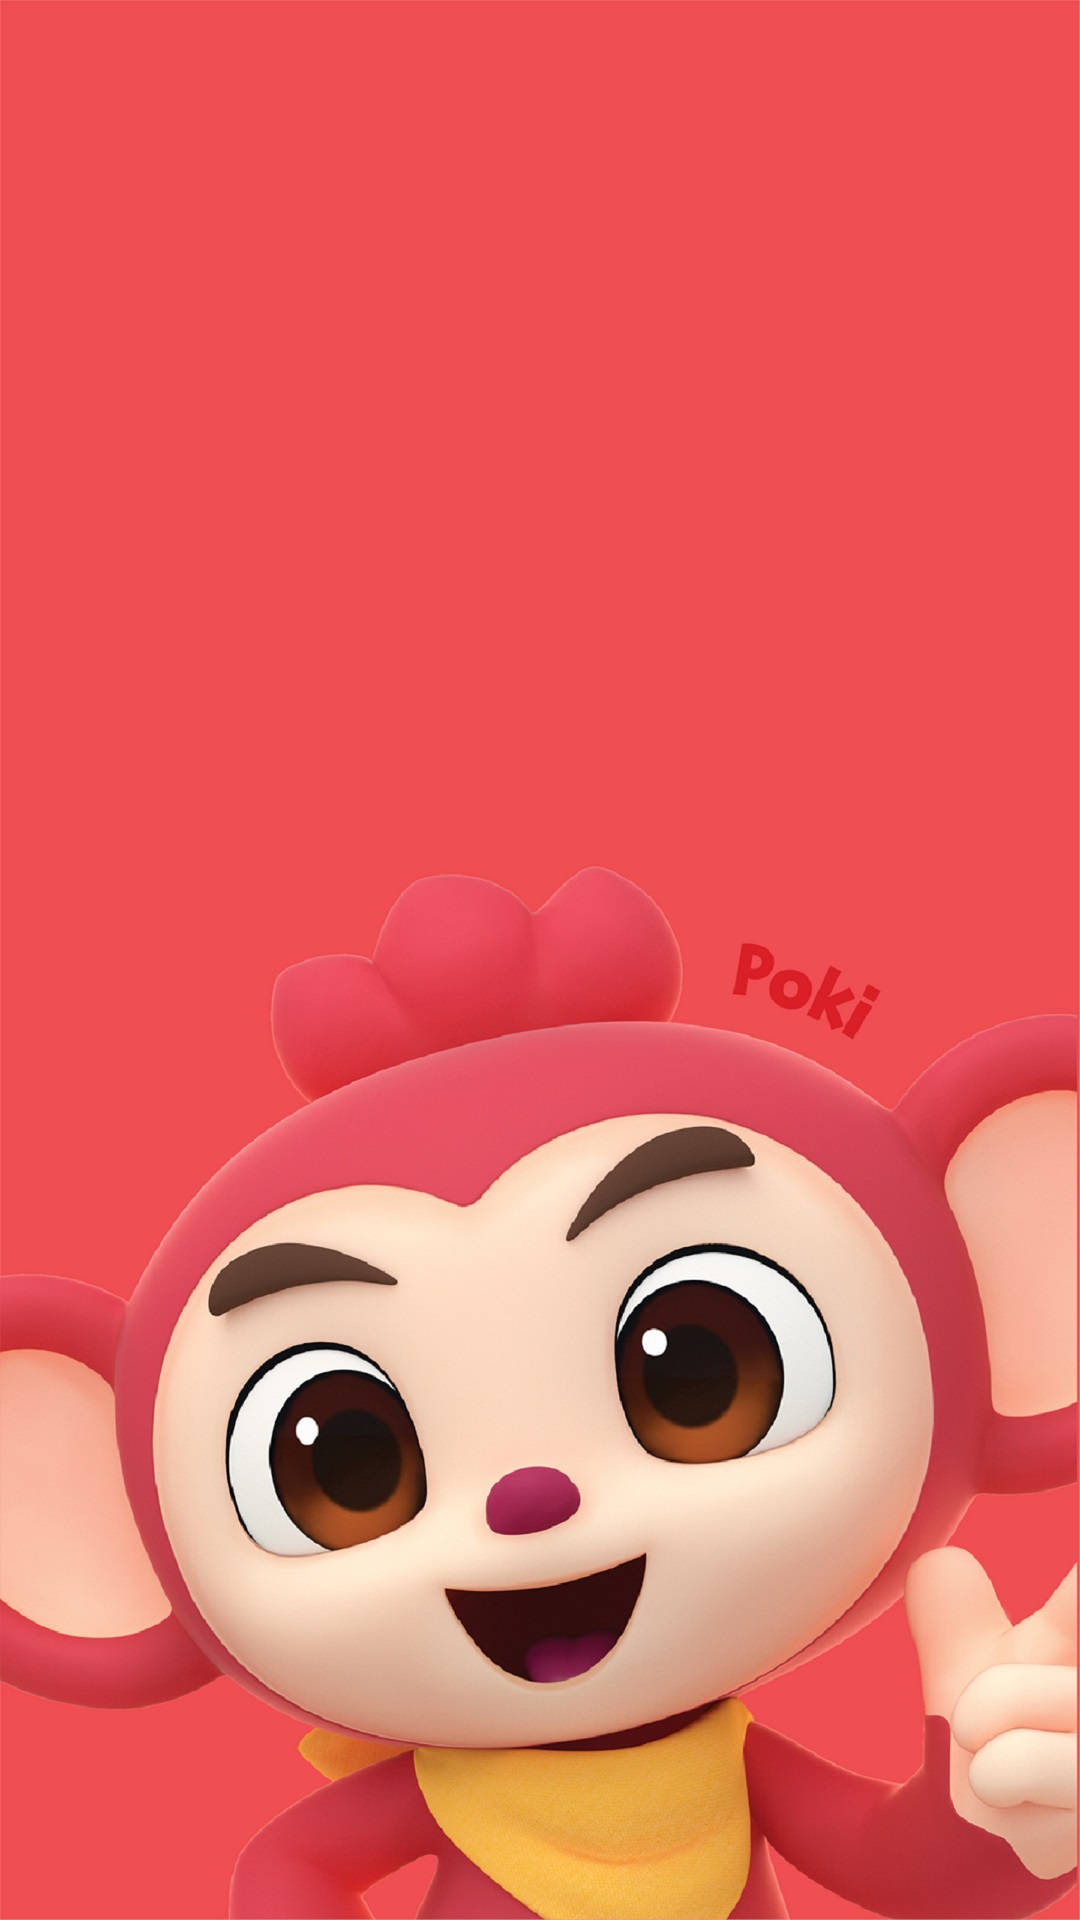 Pinkfong Poki Red Poster Background